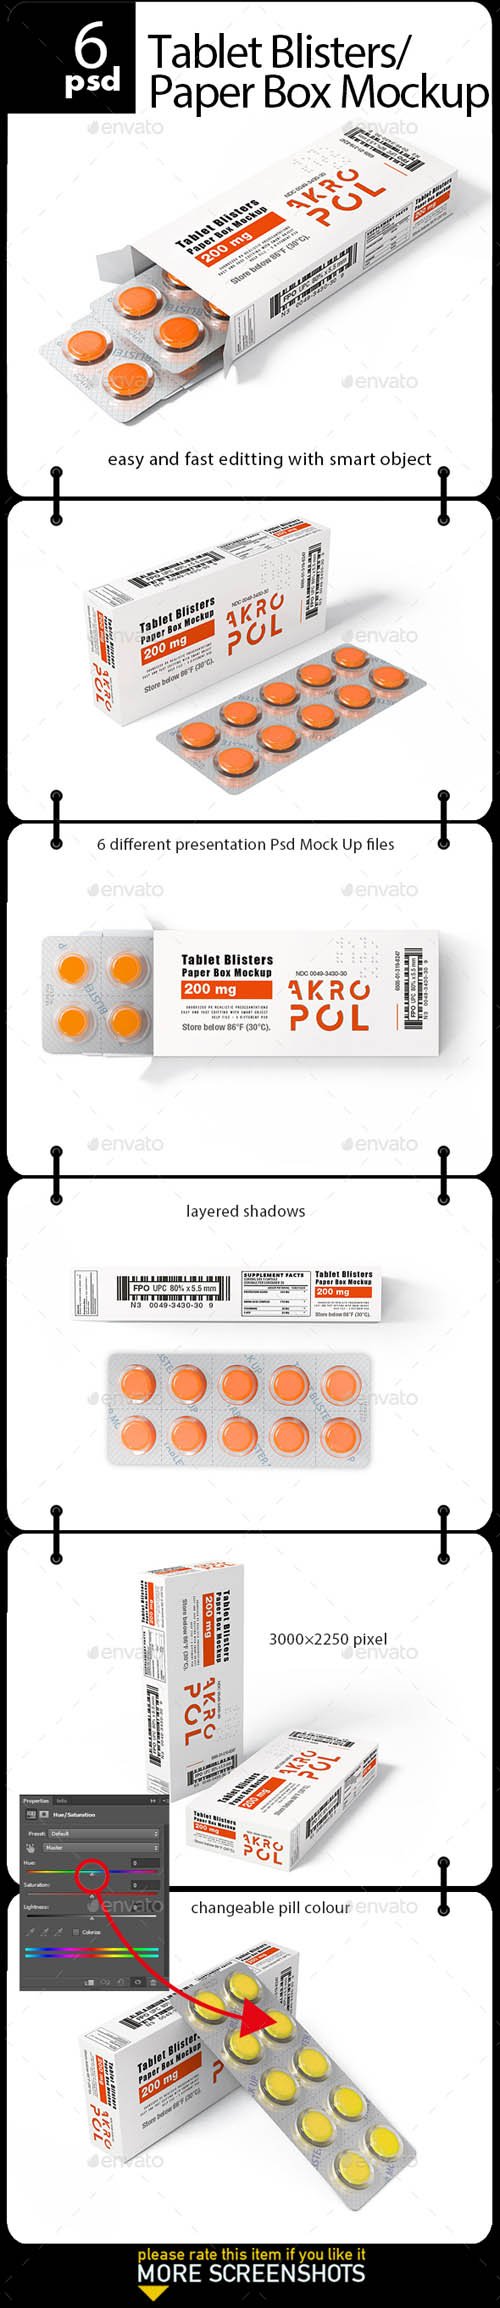 Tablet Blisters/ Paper Box Mockup 20332727